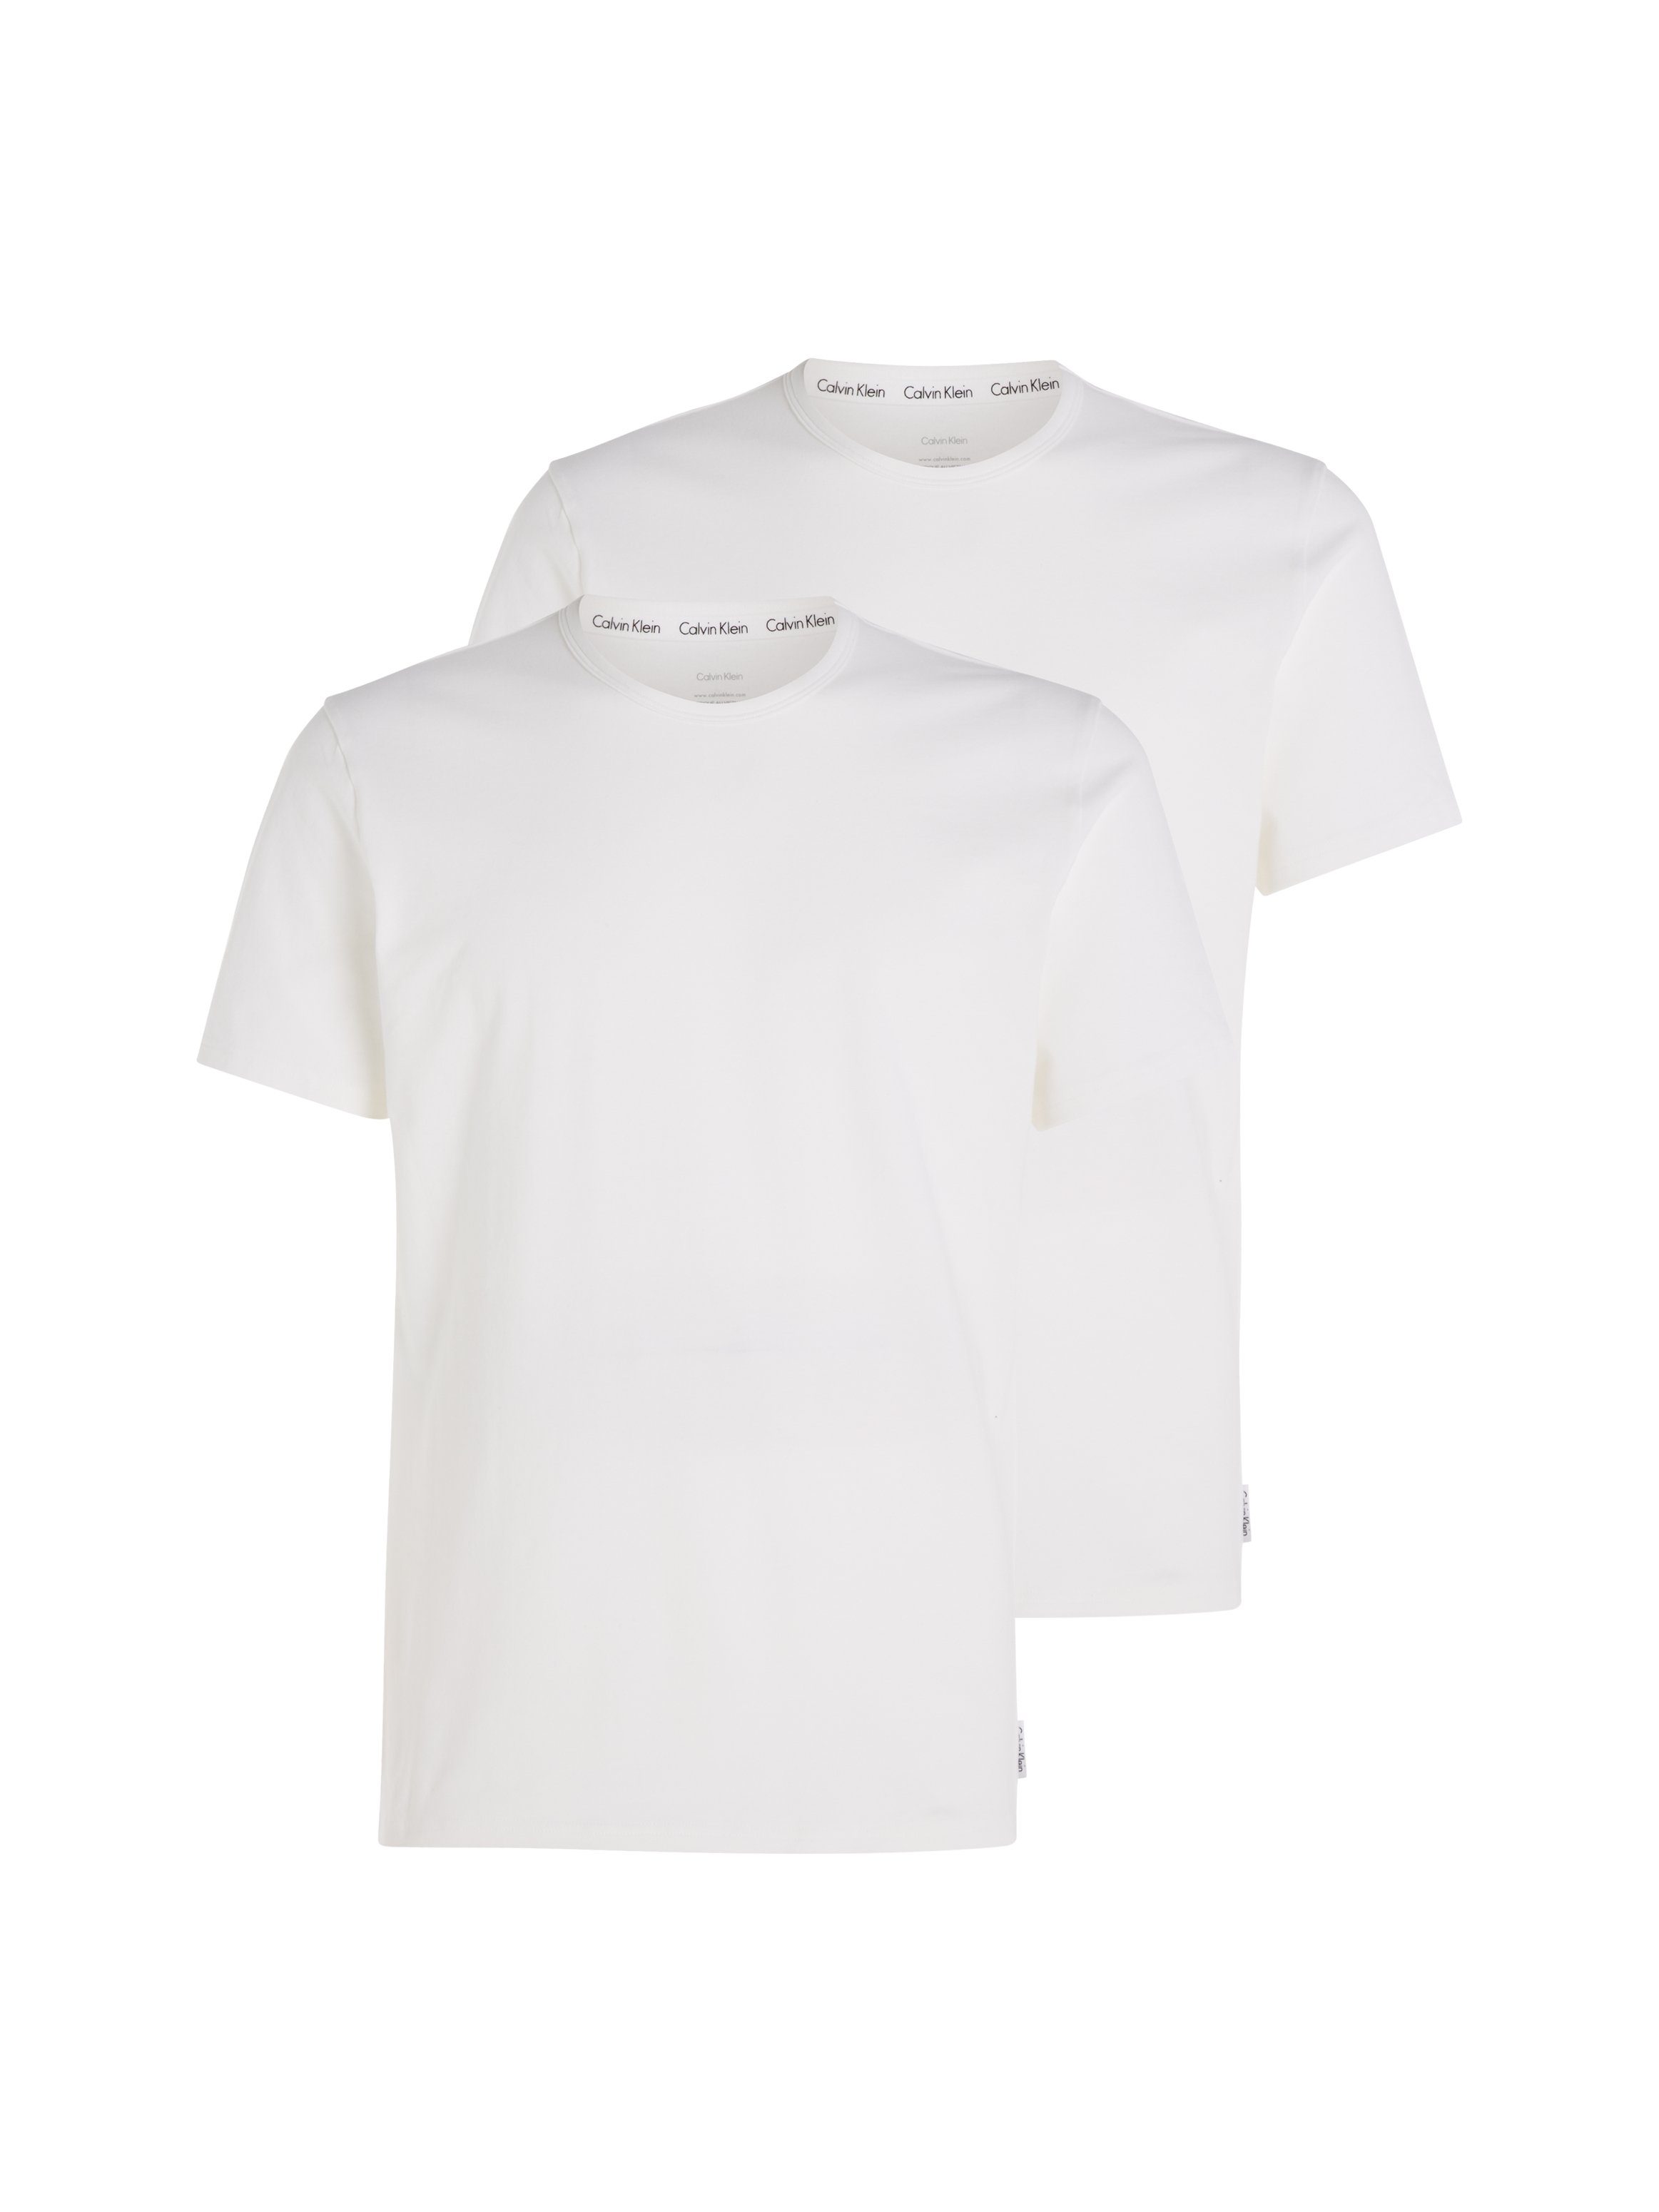 Calvin Klein t-shirts wit ronde hals duopack Small